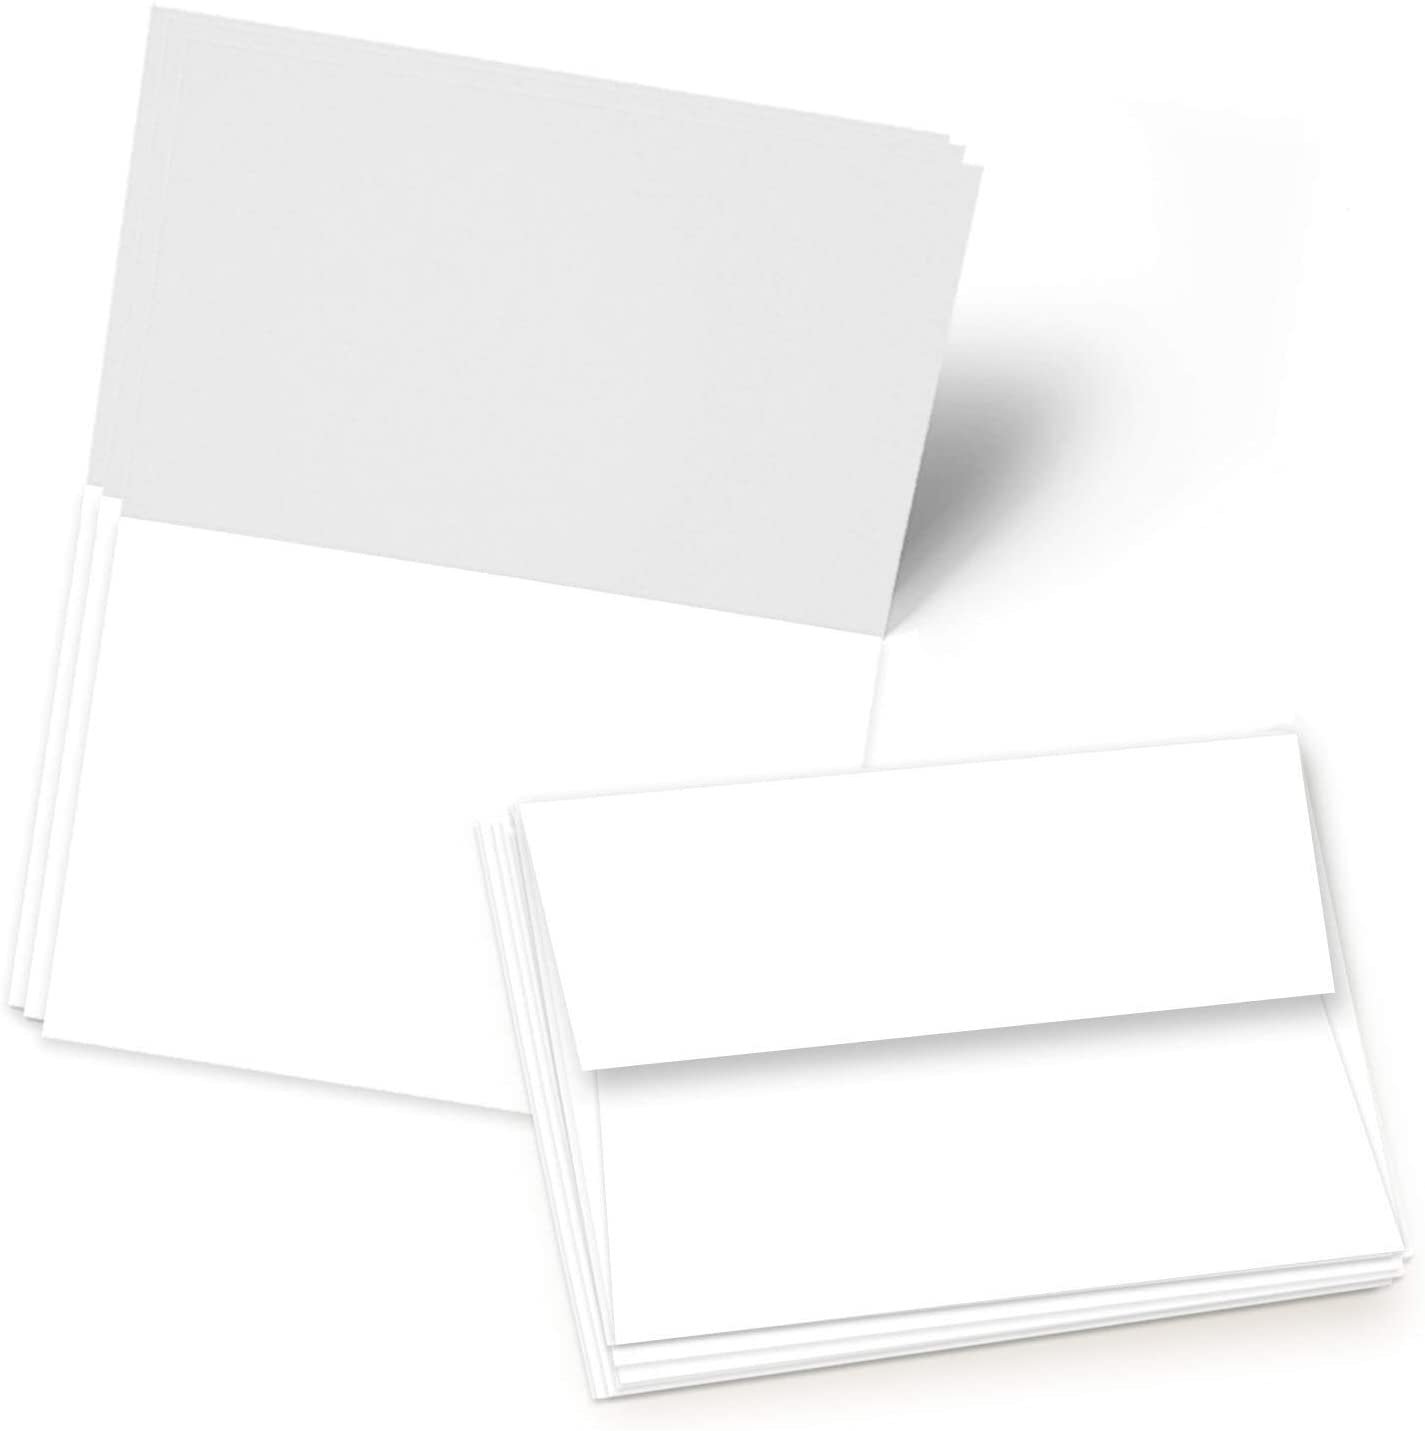 Canson Blank Greeting Cards - White, Watercolor with Envelope, Pkg of 30